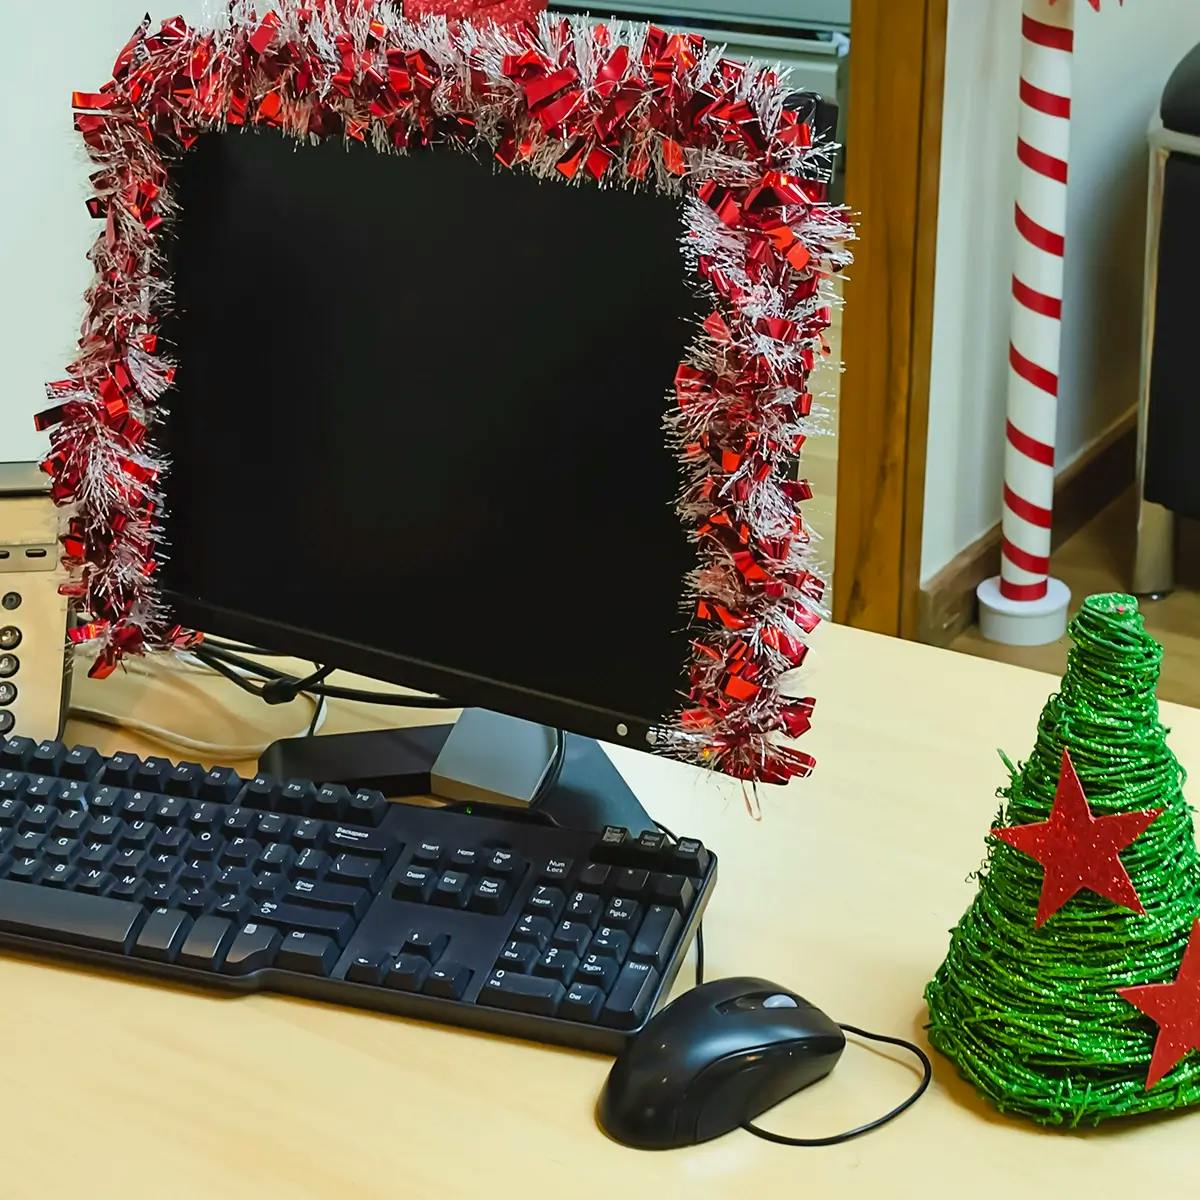 Computer screen draped in garland with a small Christmas tree on the desk to the right. 